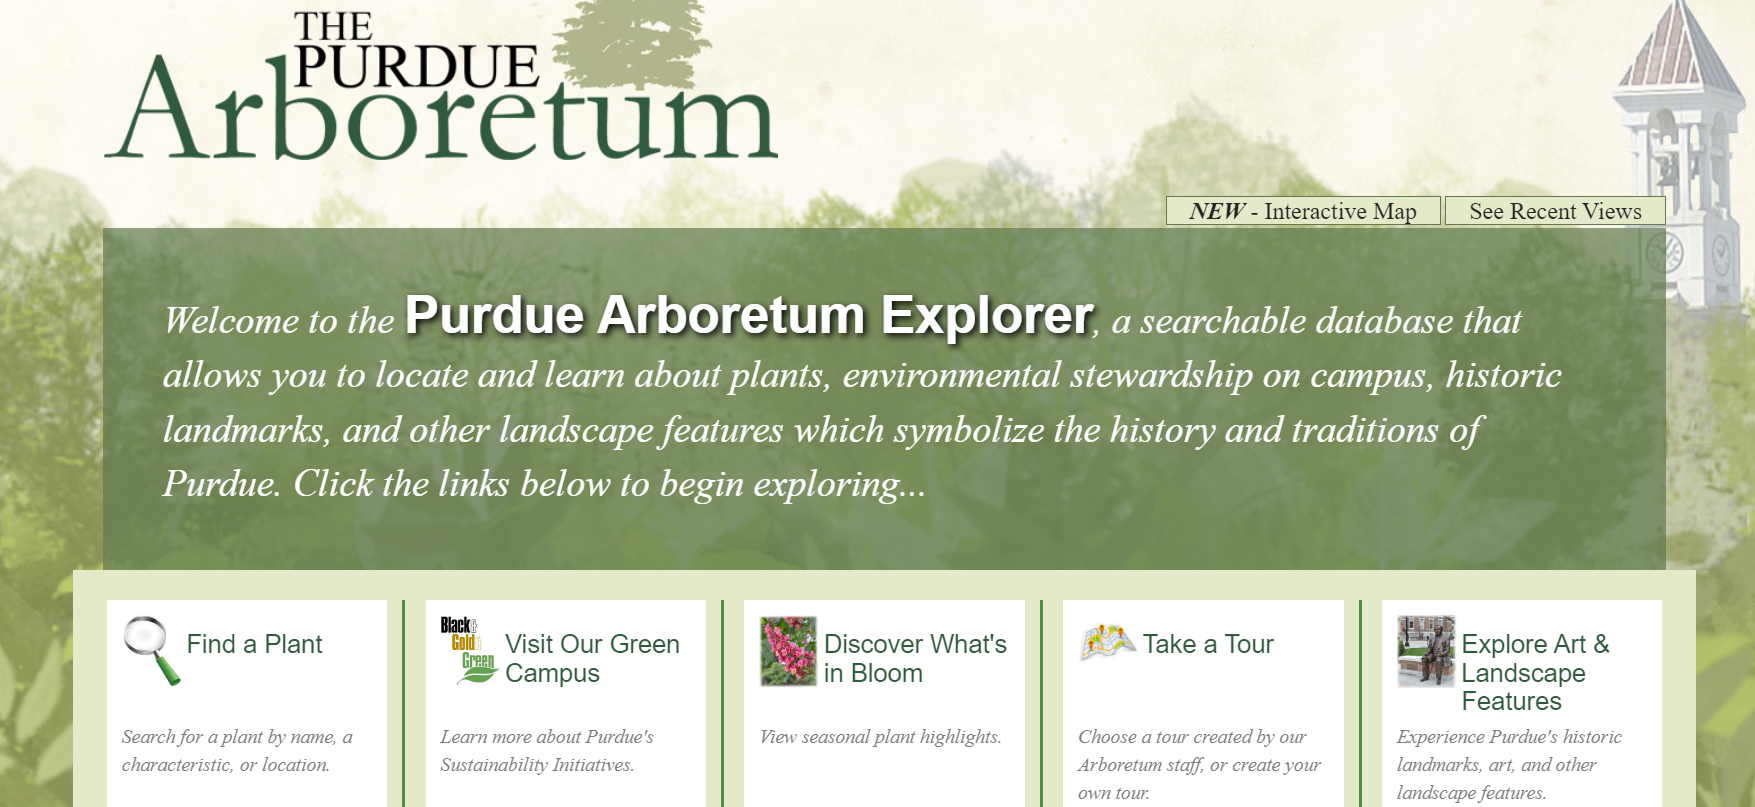 screenshot of the homepage of Purdue Arboretum Explorer. The color scheme is green and the page offers a welcome message to its "searchable database."